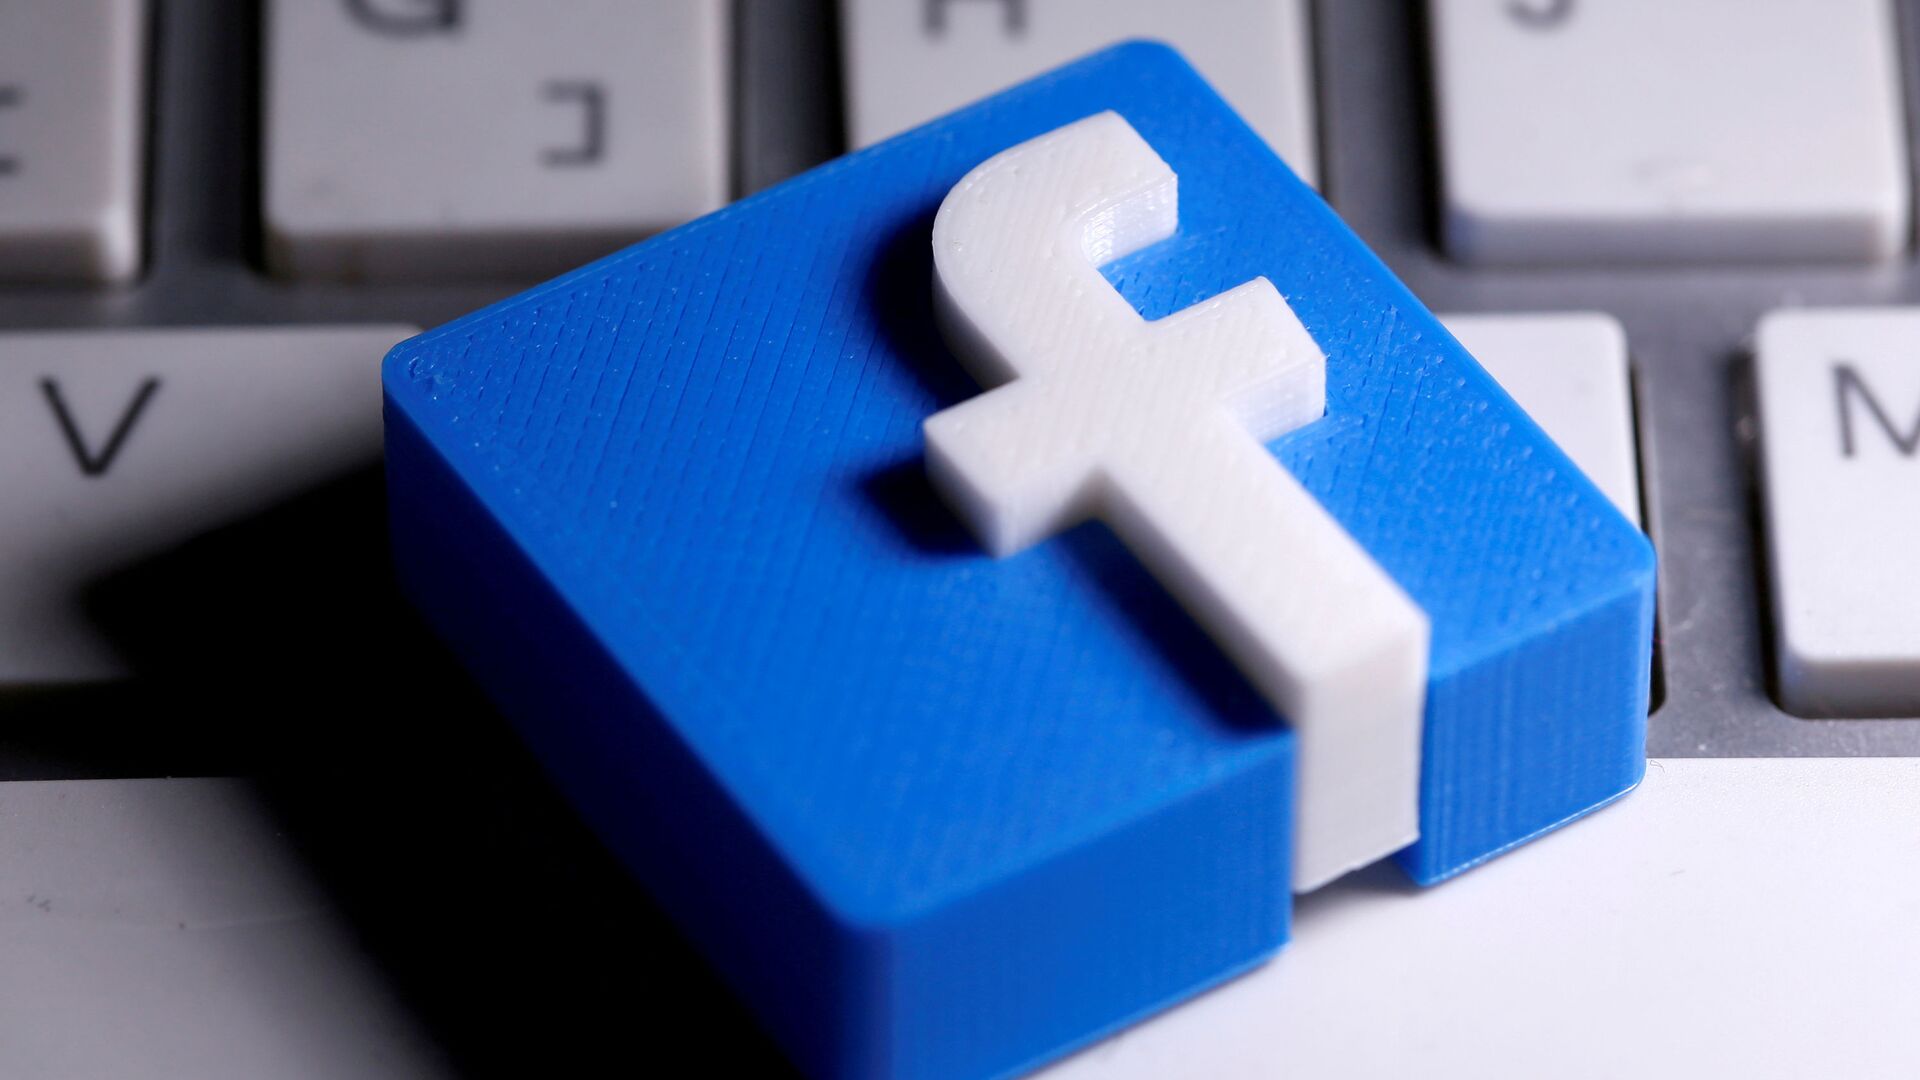 A 3D-printed Facebook logo is seen placed on a keyboard in this illustration taken March 25, 2020.  - Sputnik International, 1920, 15.03.2021